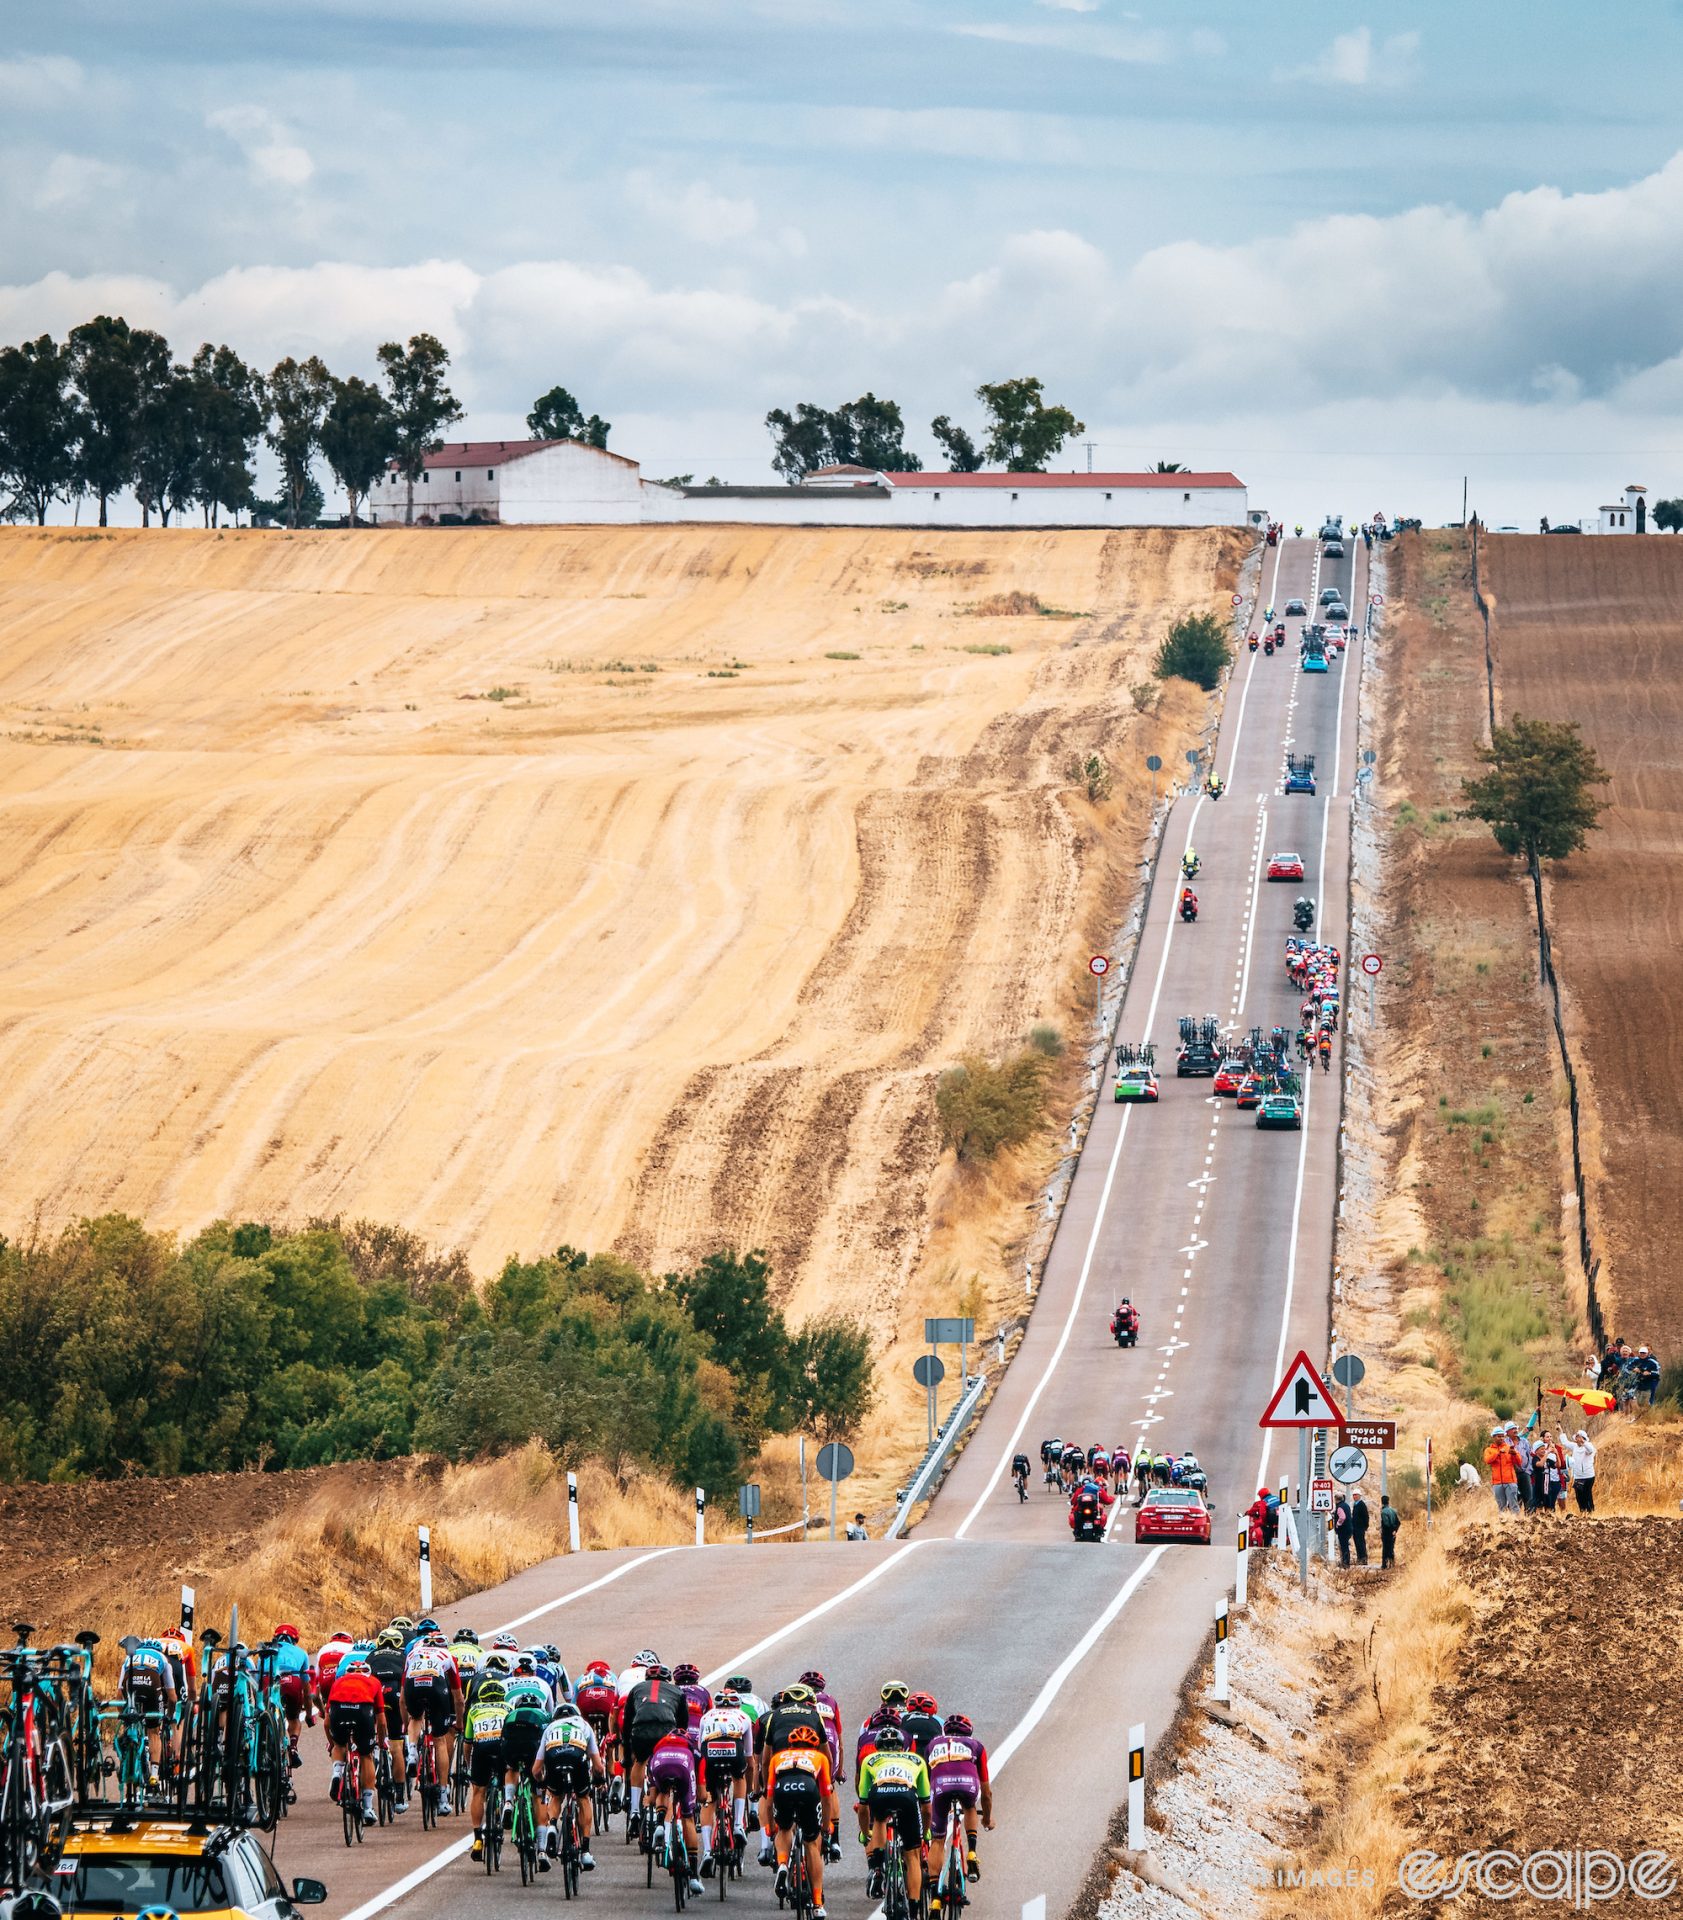 A broken-up pack races down a straight, undulating road in the Tour of Spain. The riders race past fields baked tan and brown by heat, with small copses of green trees. In the foreground, a large group of riders spreads across the road in a diagonal pattern, while up ahead two other groups make the same shape. Each group is hundreds of yards apart from the other, and followed by a smattering of support vehicles. This is the characteristic of a pack broken up by crosswinds.